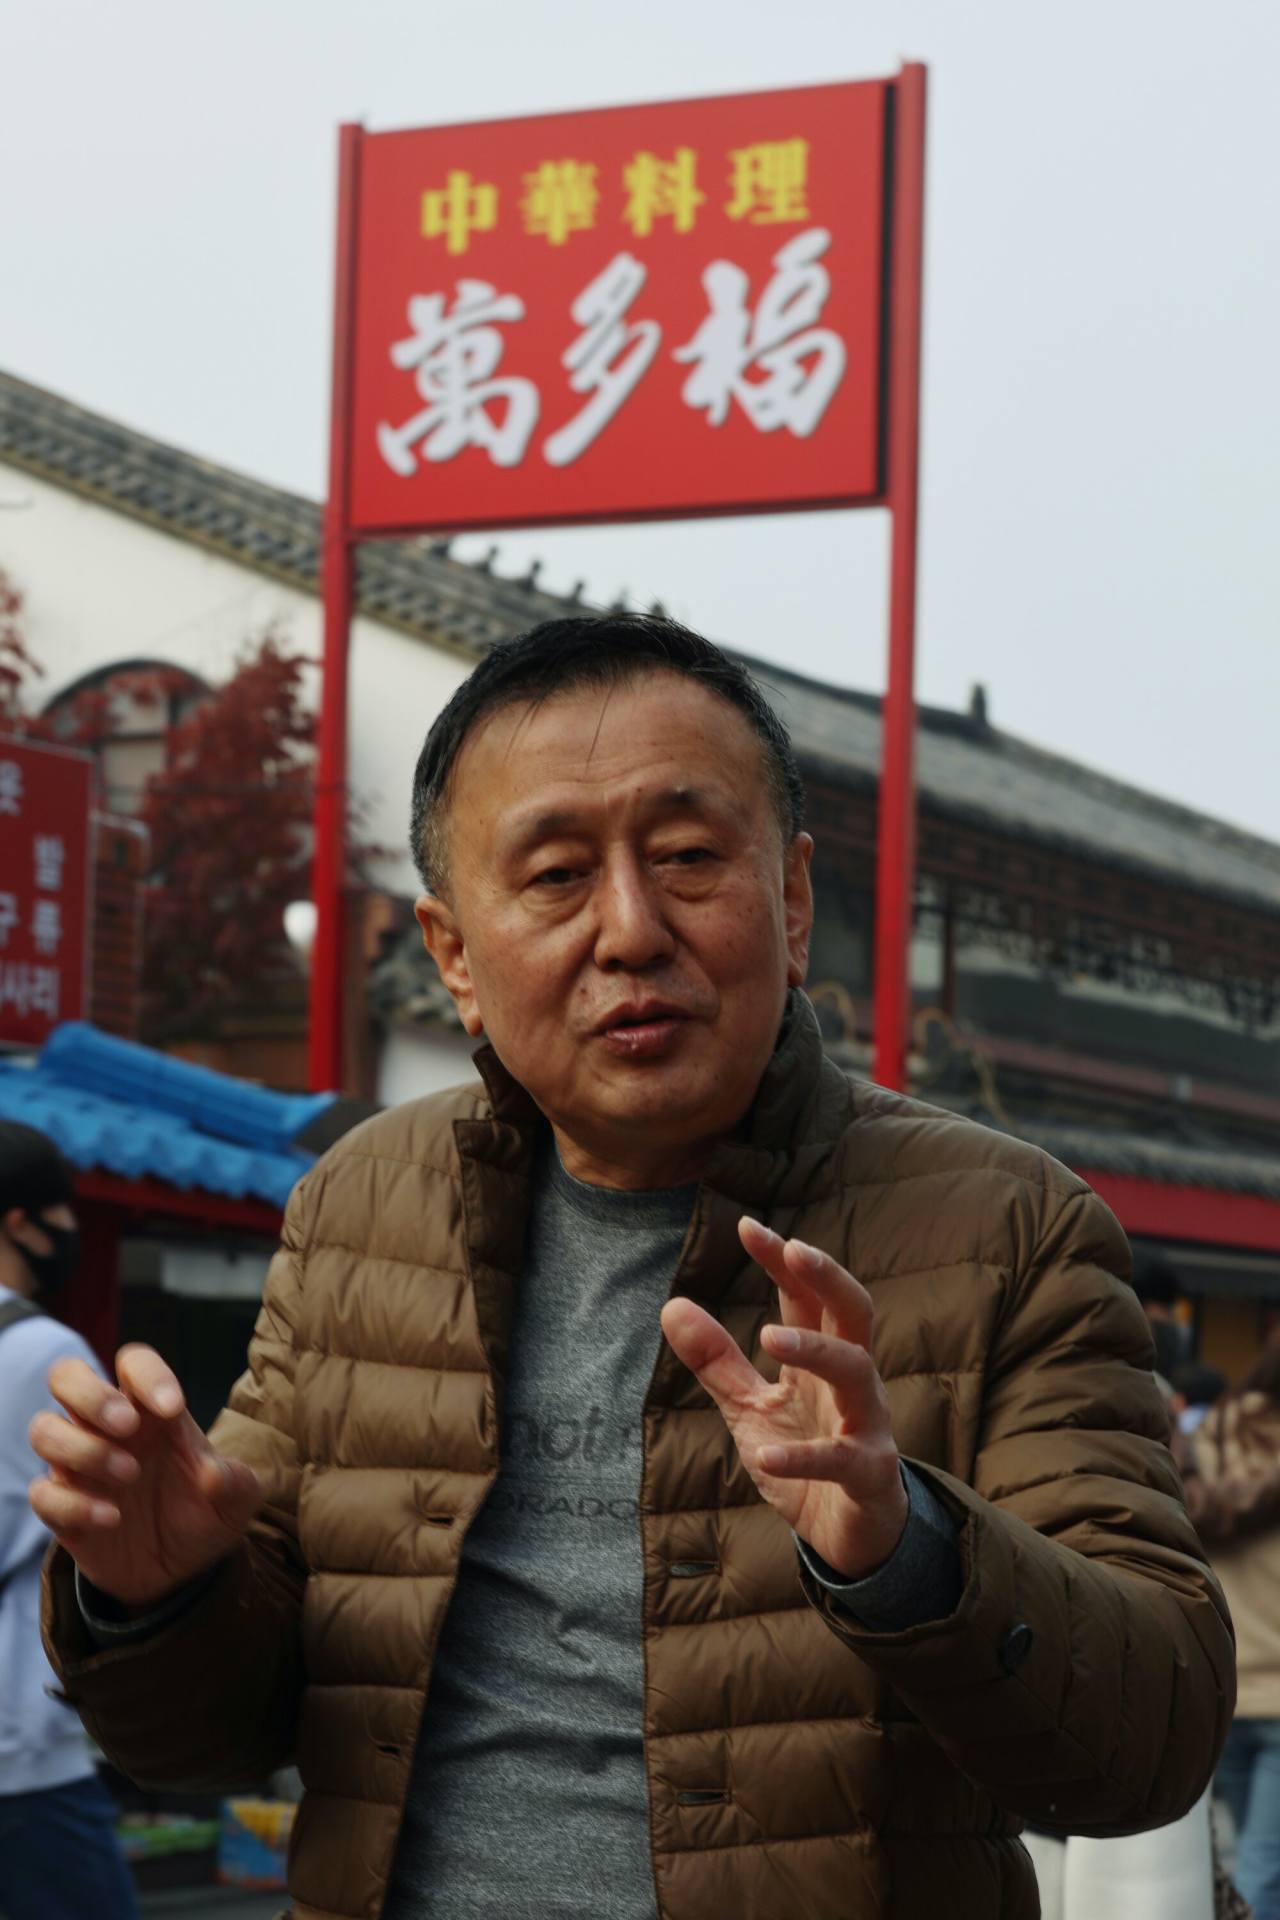 Seo Hak-bo, 62, is a restaurateur and second generation Chinese Korean, a descendant of an immigrant from Shandong province, China.Photo © Hyungwon Kang